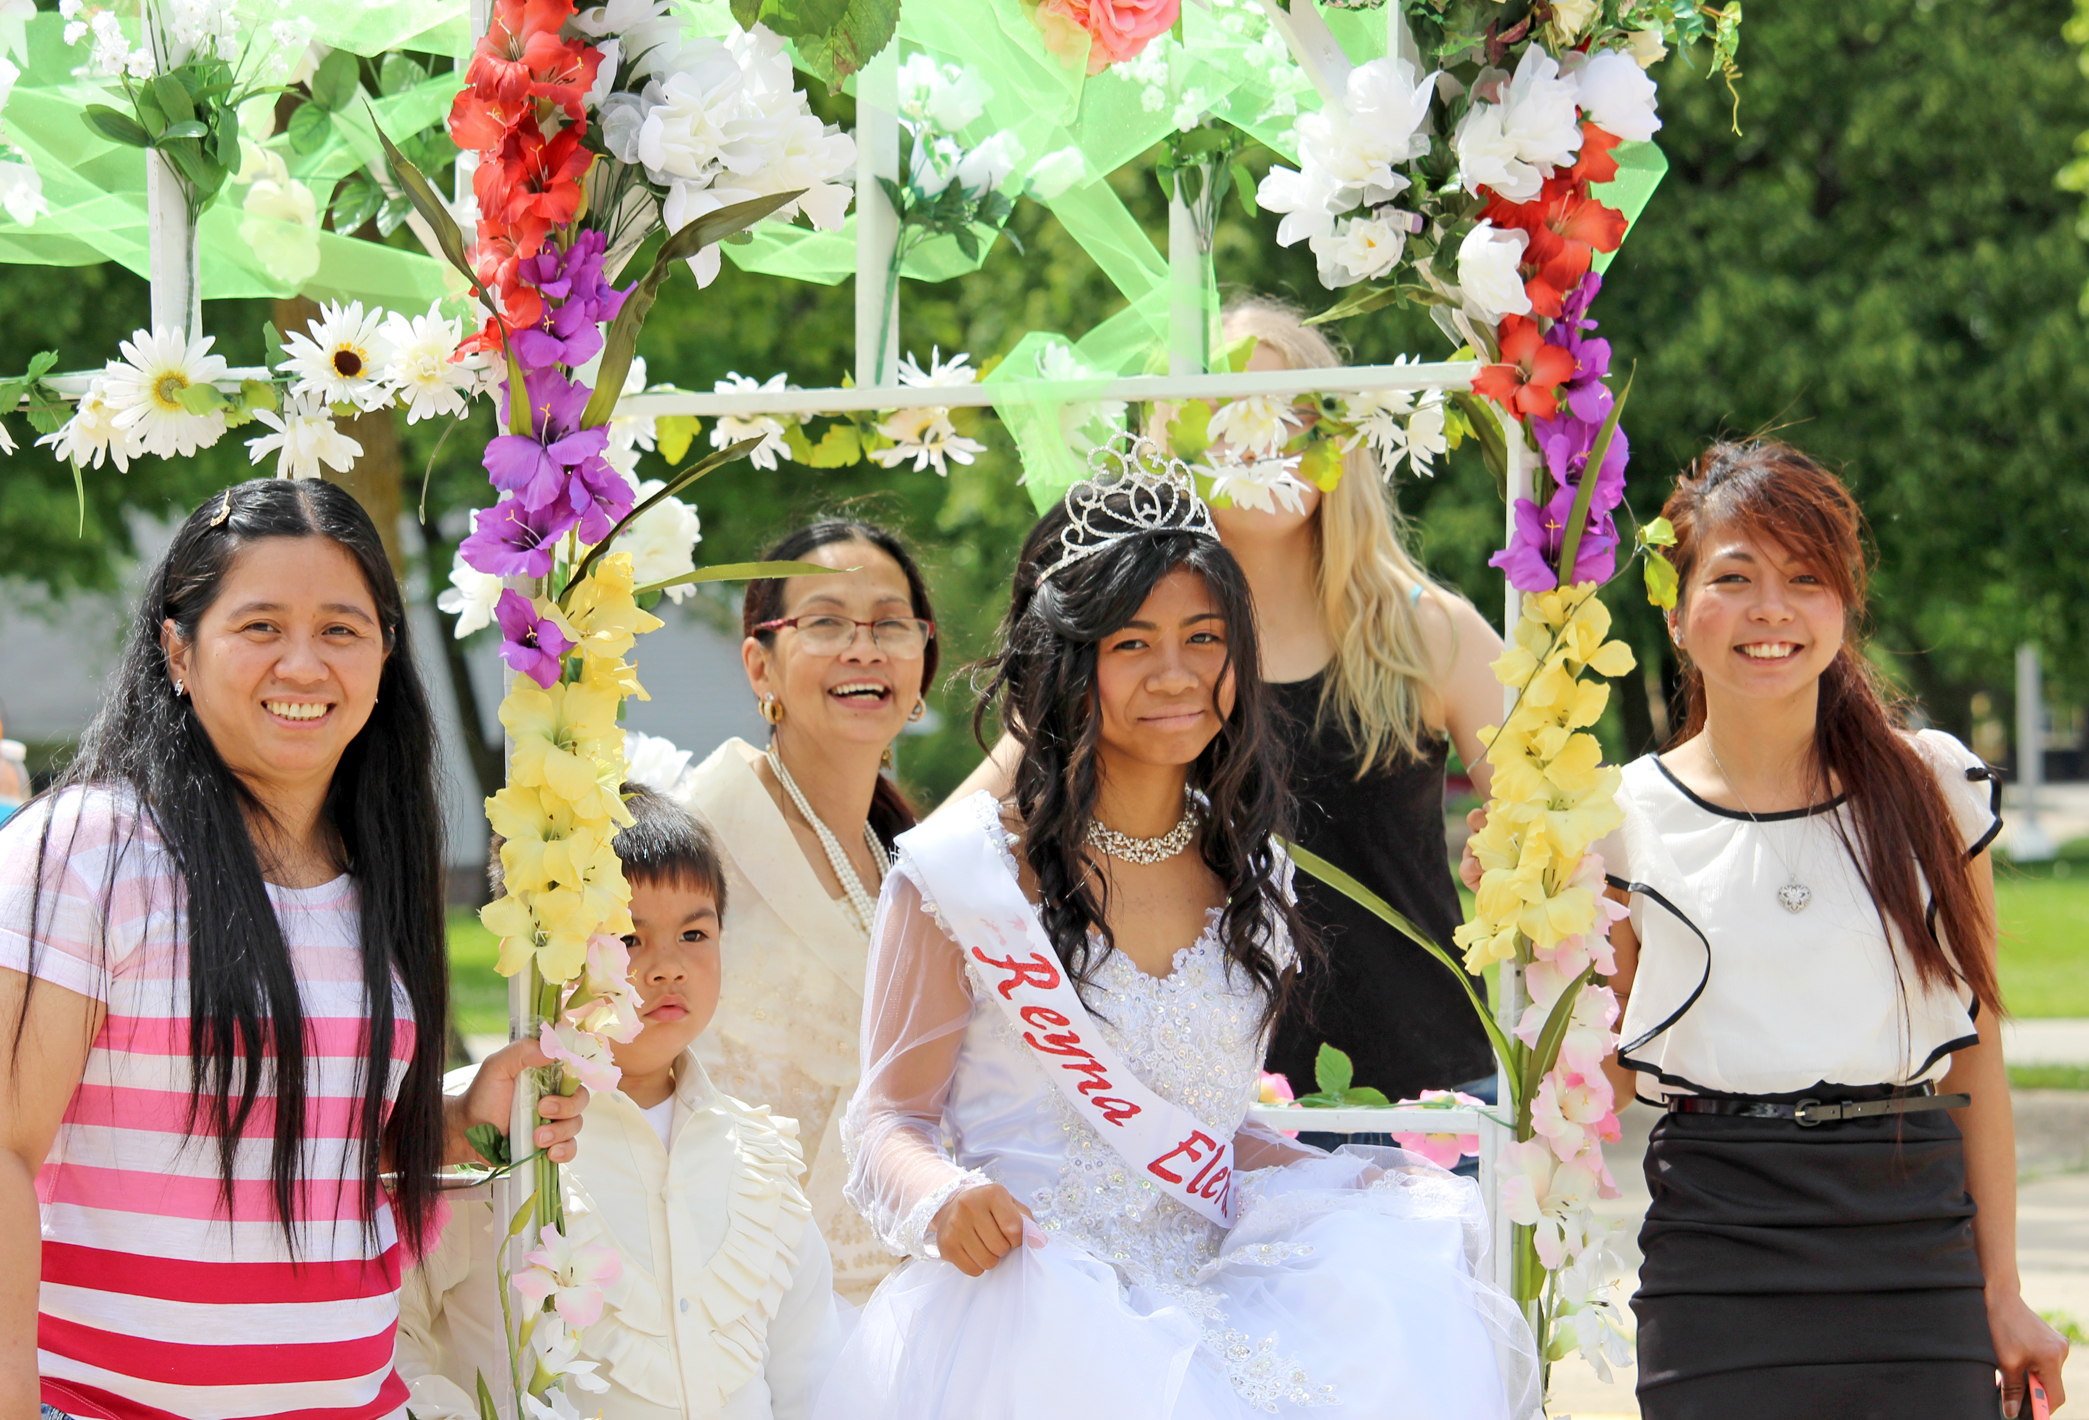 Residents, visitors join in Fil-Am’s annual celebration